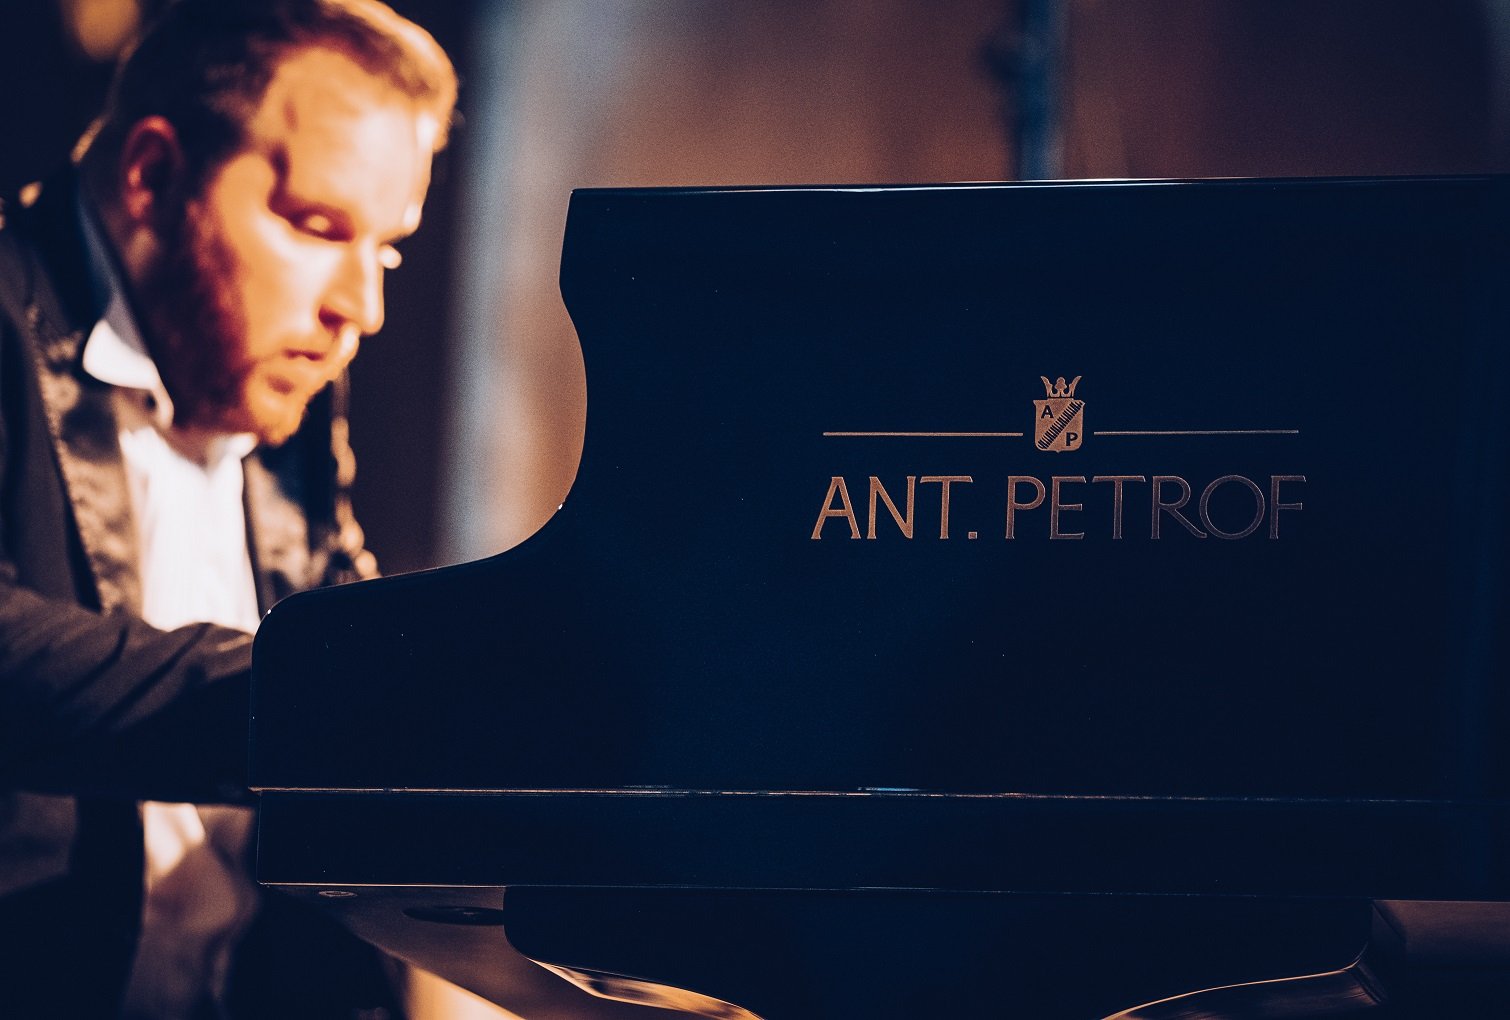 ANT. PETROF is among „Iconic“ according to Piano Buyer